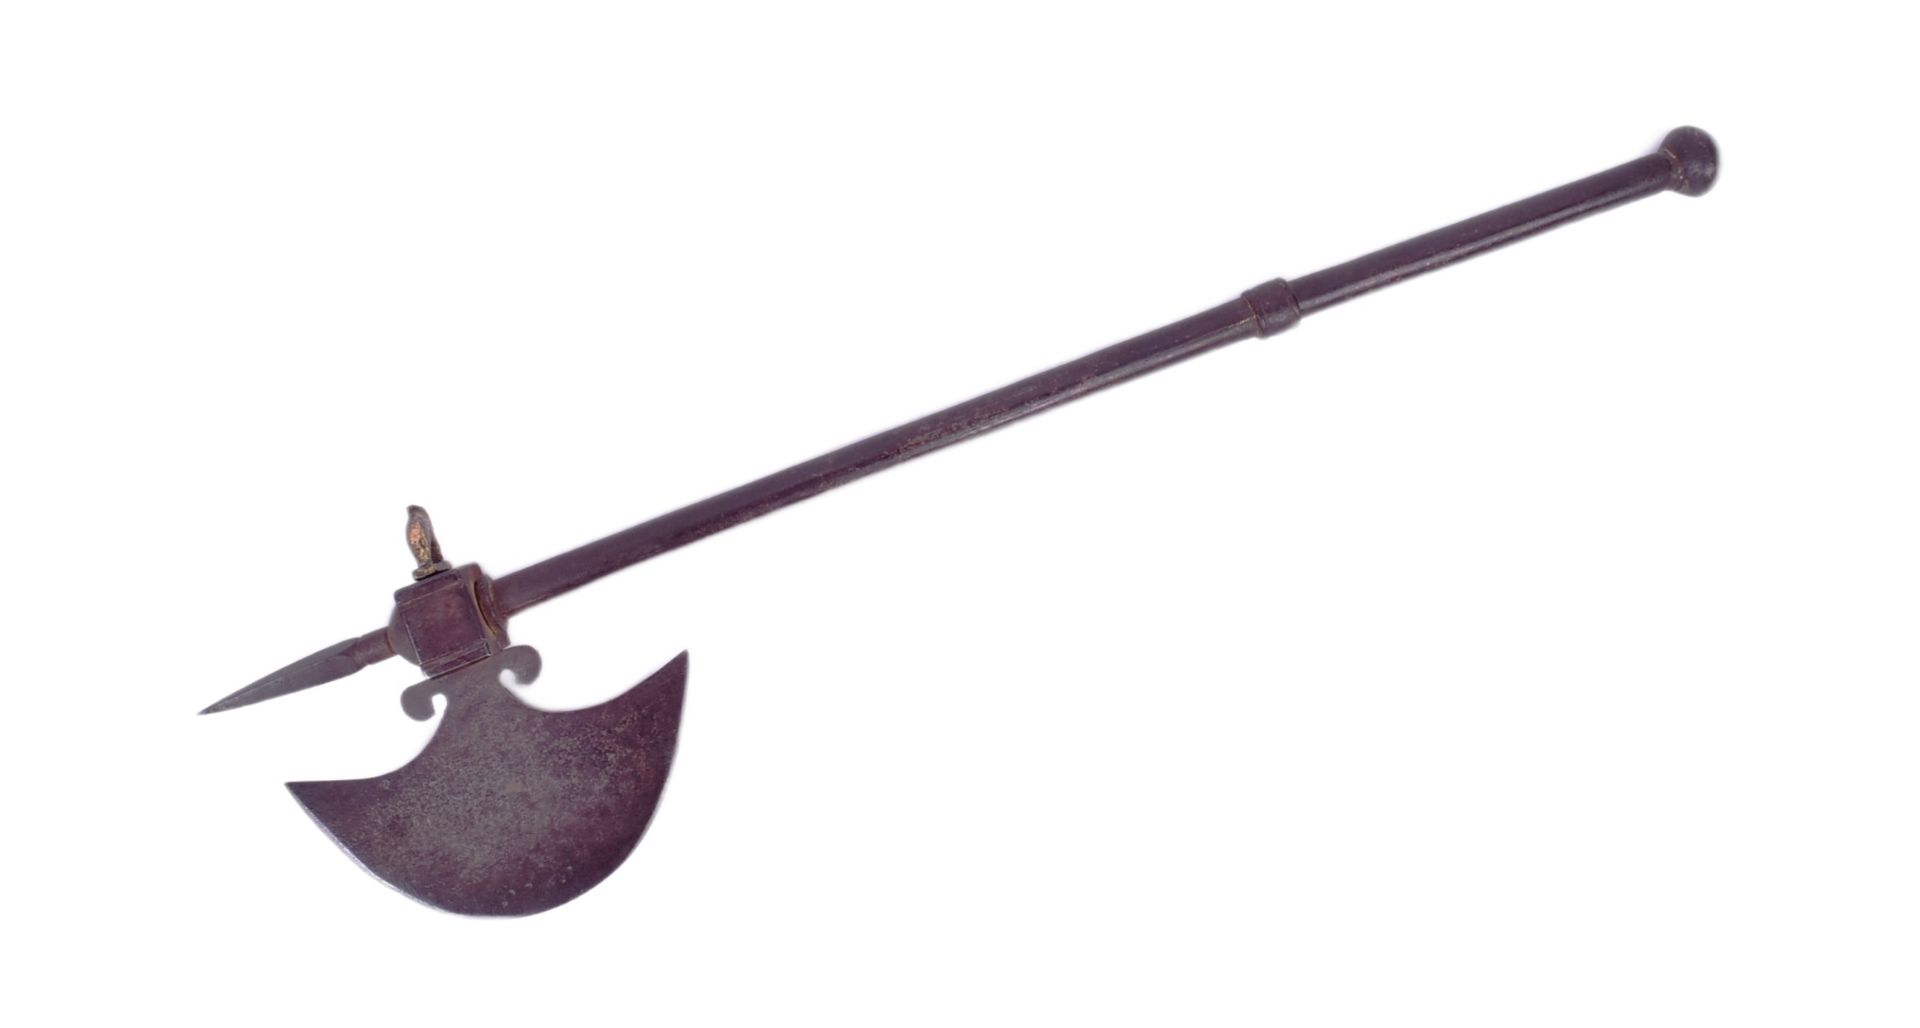 19TH CENTURY INDIAN TABAR AXE WITH CONCEALED BLADE